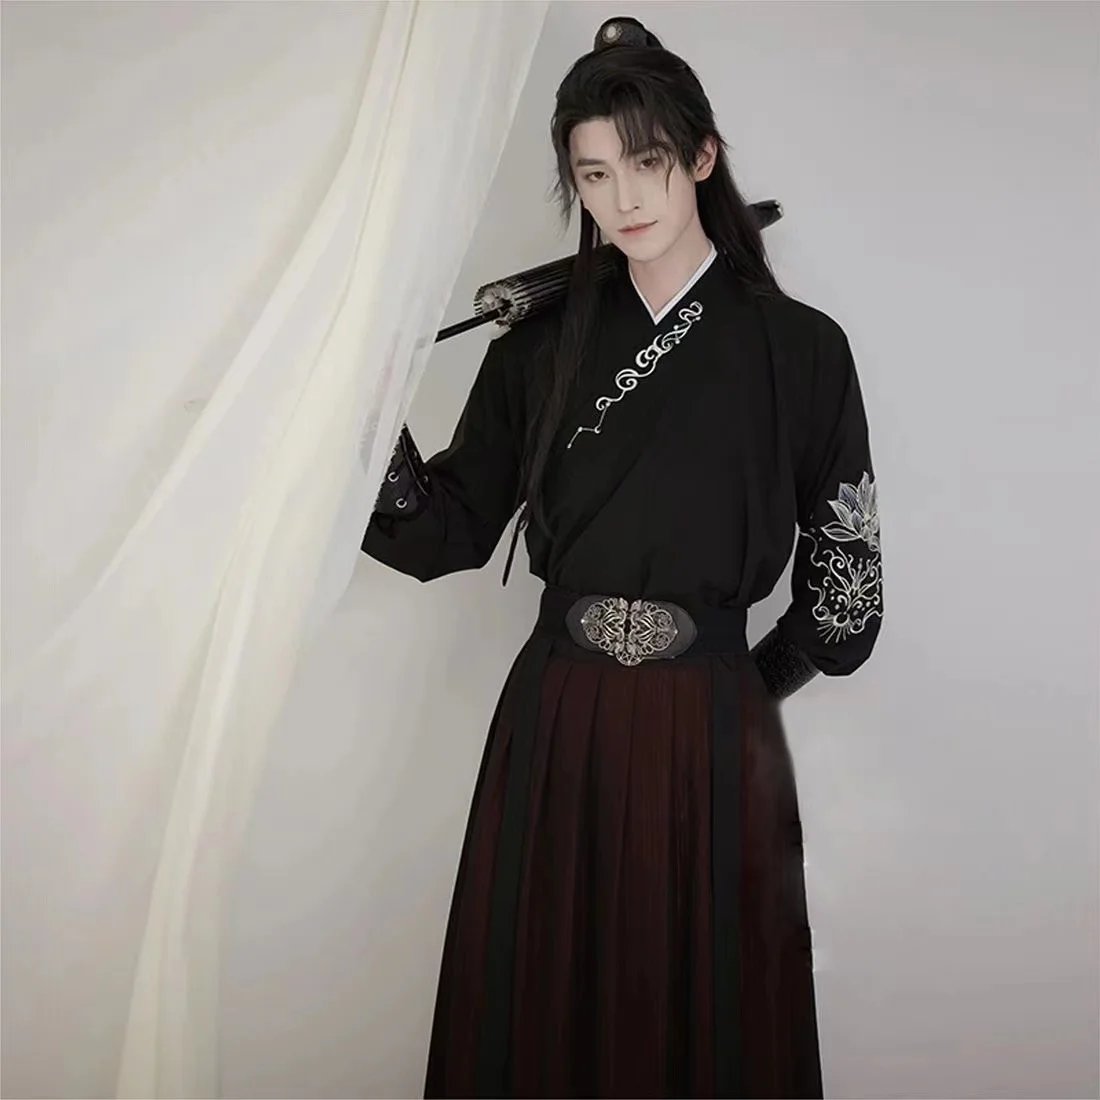 Chinese Style Hanfu Men Ancient Black Costume Hanfu Dress for Boys Girls Young Men Women Photography Cosplay Party Show Clothing dvotinst women photography props maternity dresses pregnancy black full sleeve backless slim midi dress studio photoshoot outfit